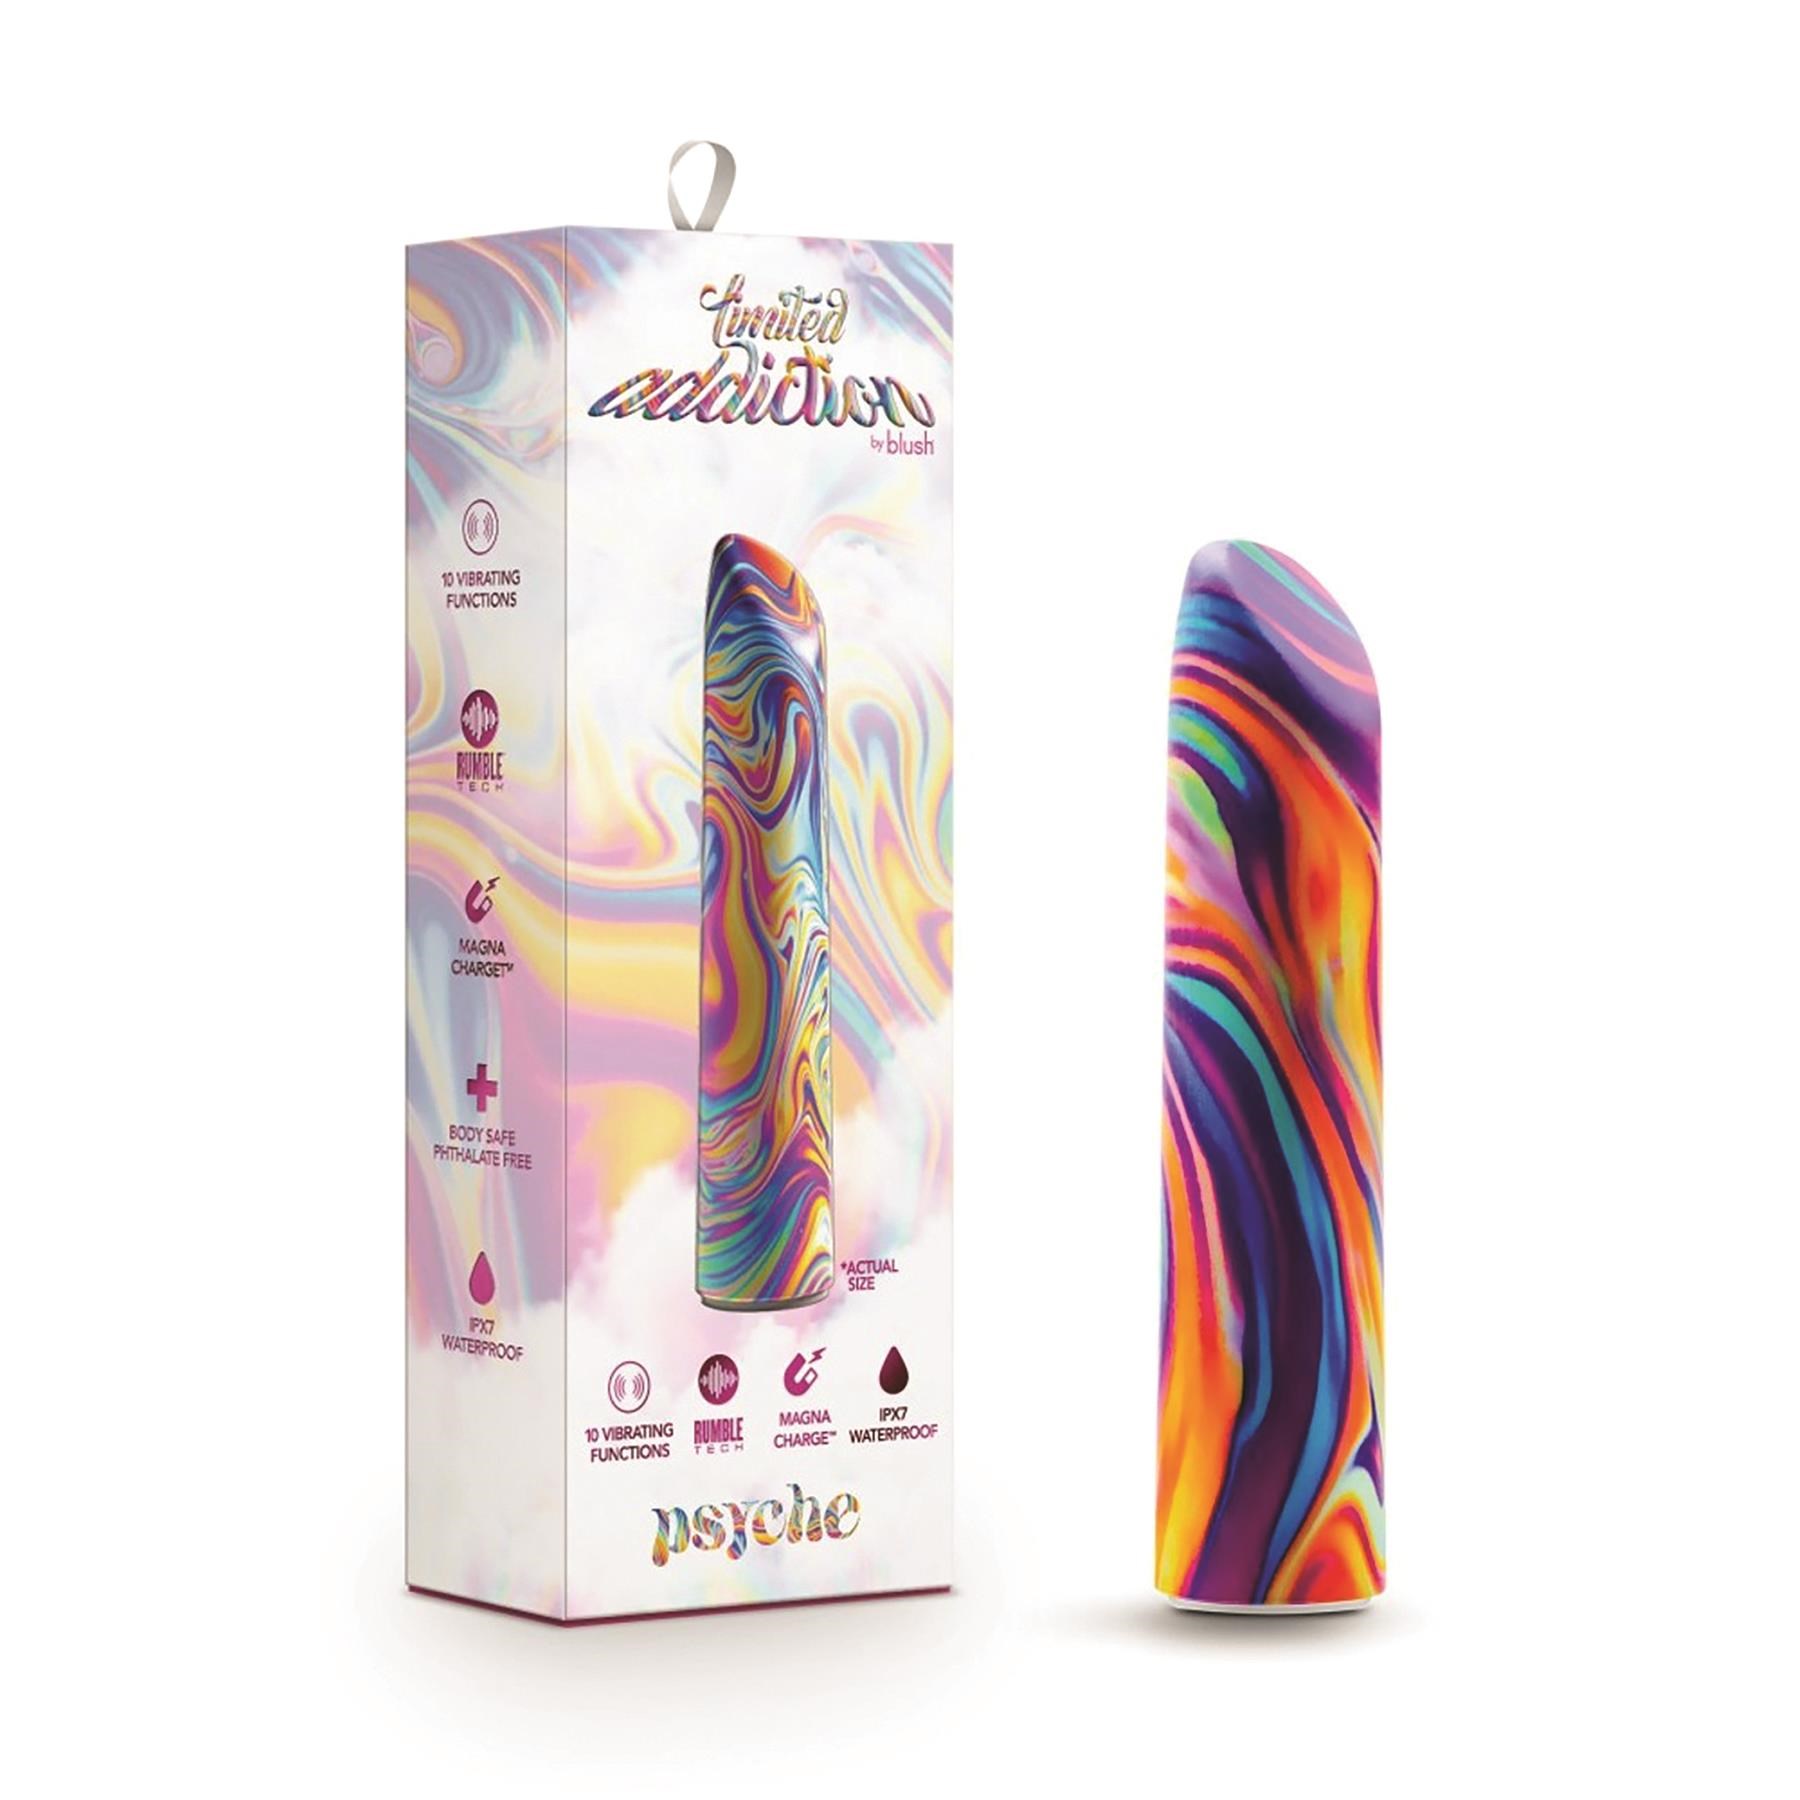 Limited Addiction Rechargeable Power Bullet - Product and Packaging - Multicolor